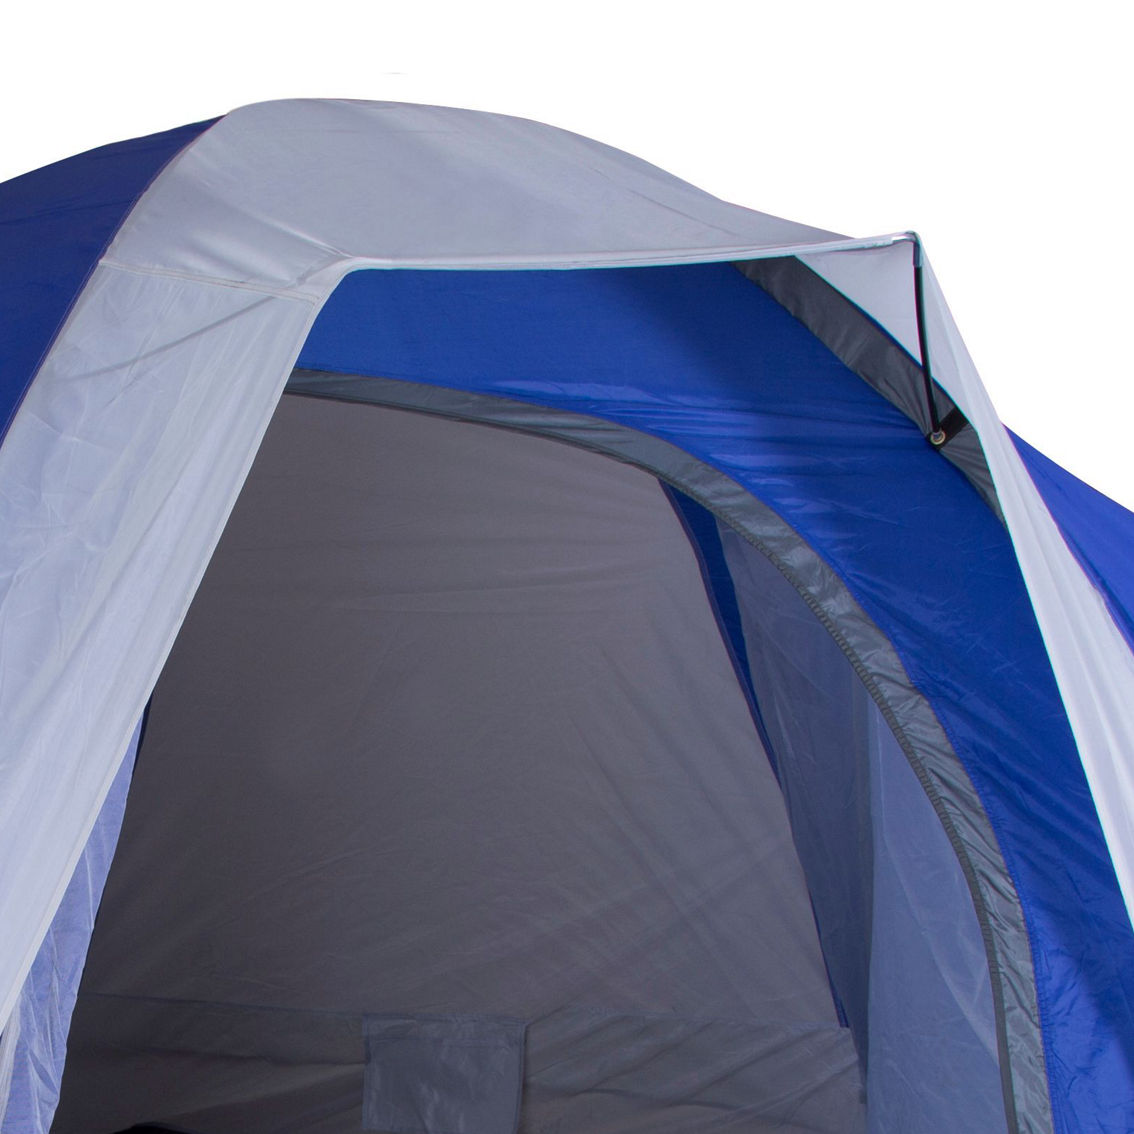 Stansport Grand 18 3-Room Family Tent - Image 4 of 5